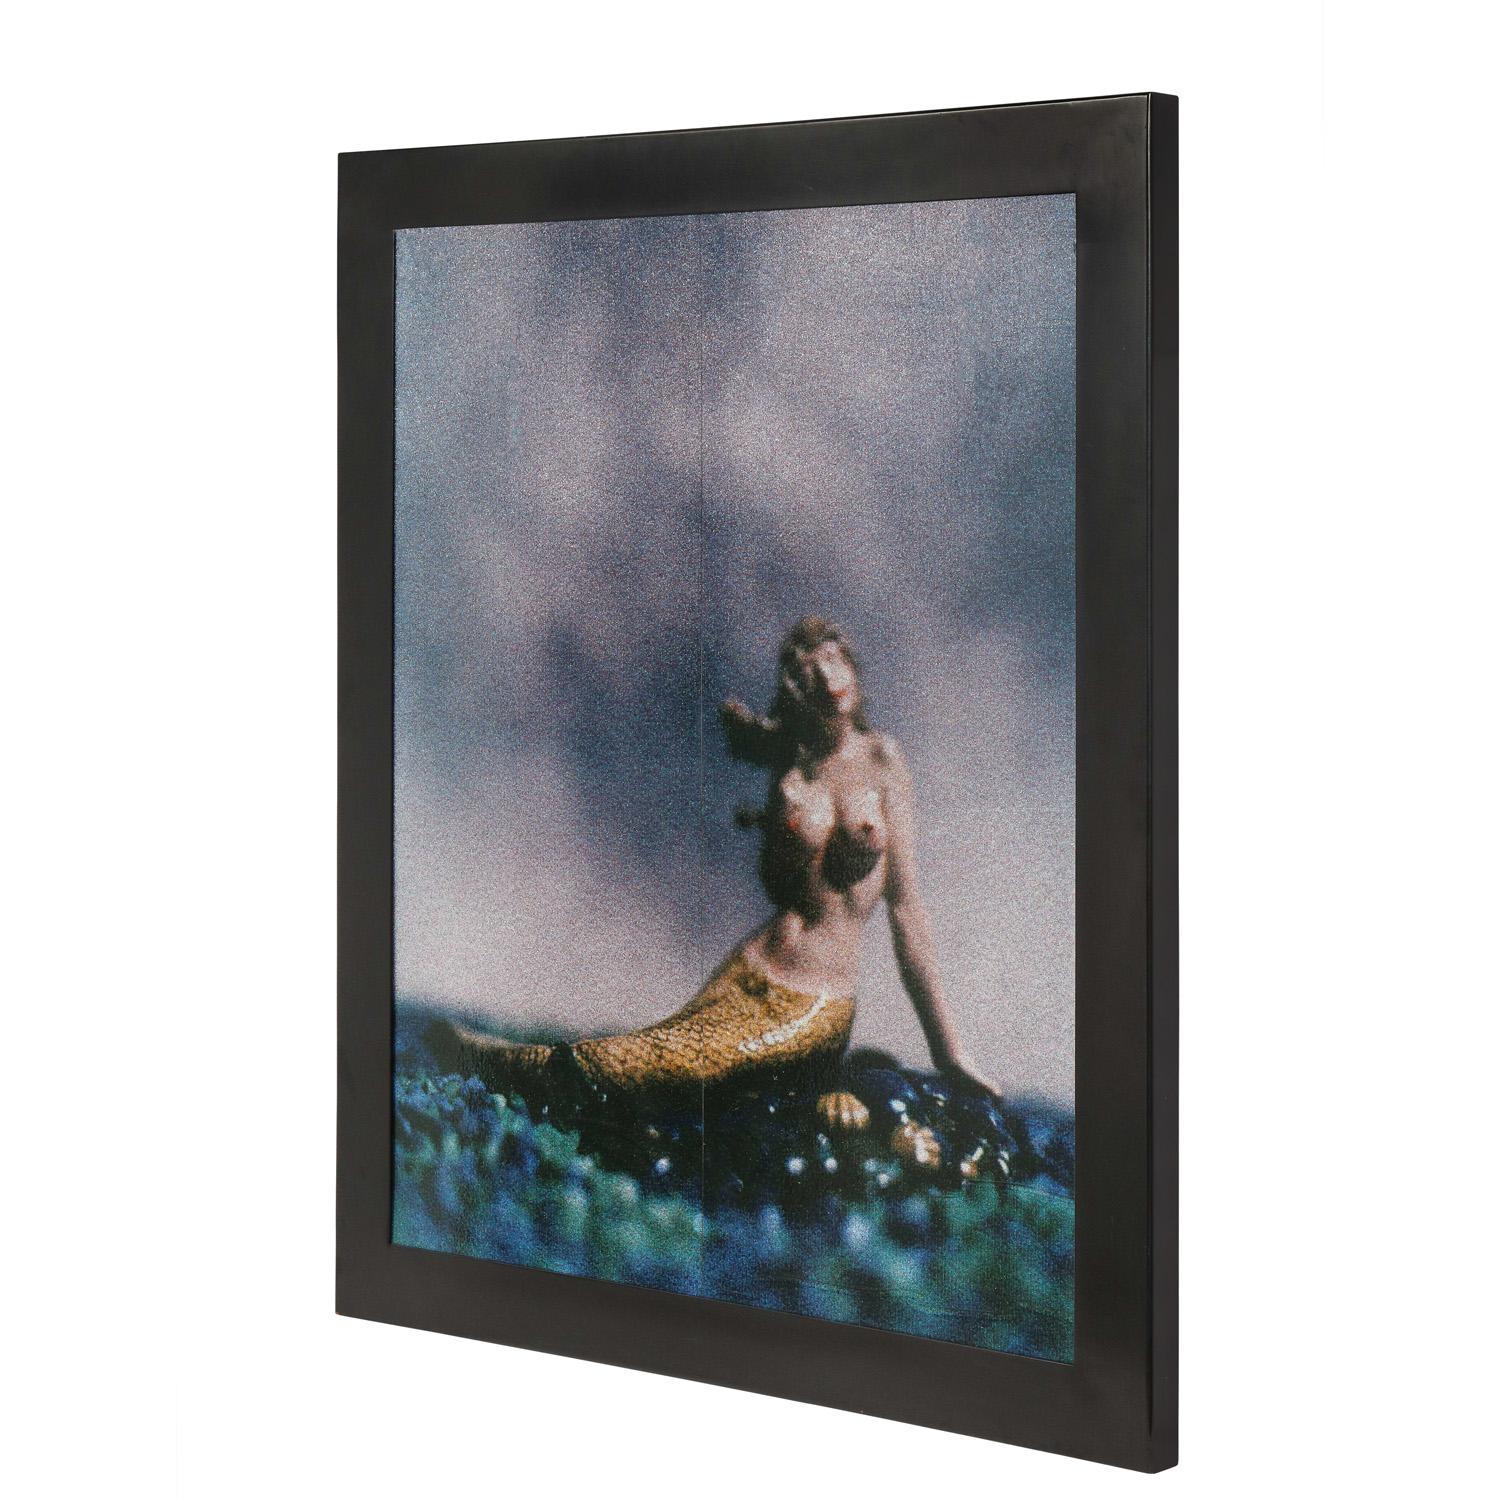 Large and unique Scanamural photographic print, Untitled from the series Die Nibelungen, on silver lame acrylic, of mermaid with custom black steel frame by David Levinthal, American 1993.  This is a unique variation and is not in the edition.  The